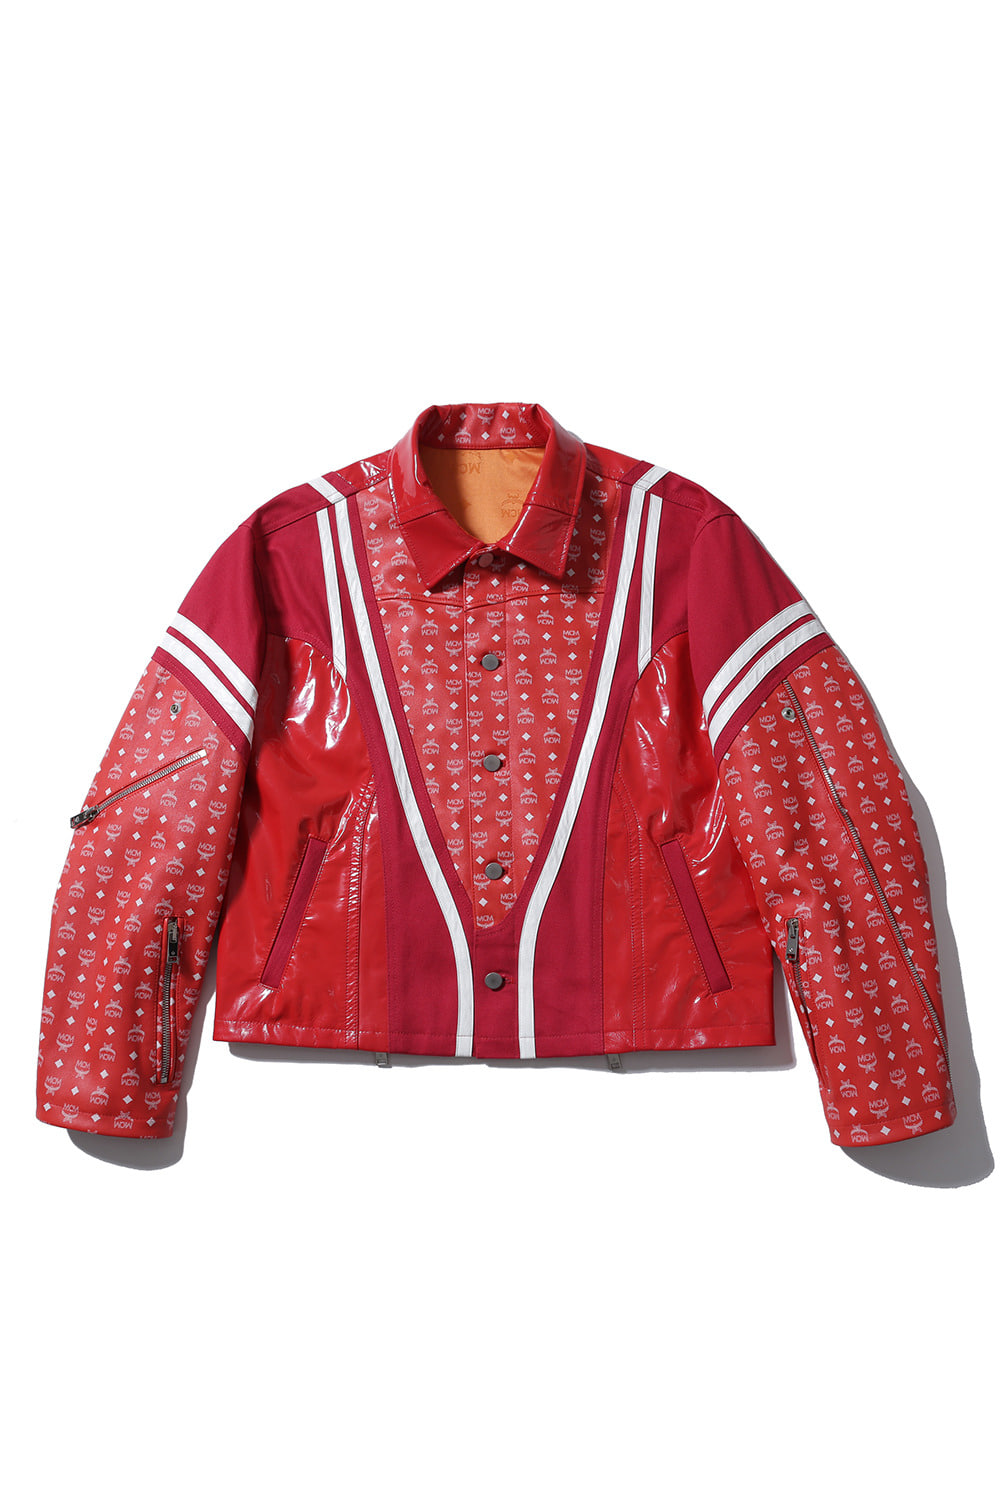 T.B.O.S x MCM Deconstructed racing club jacket 001 (red)